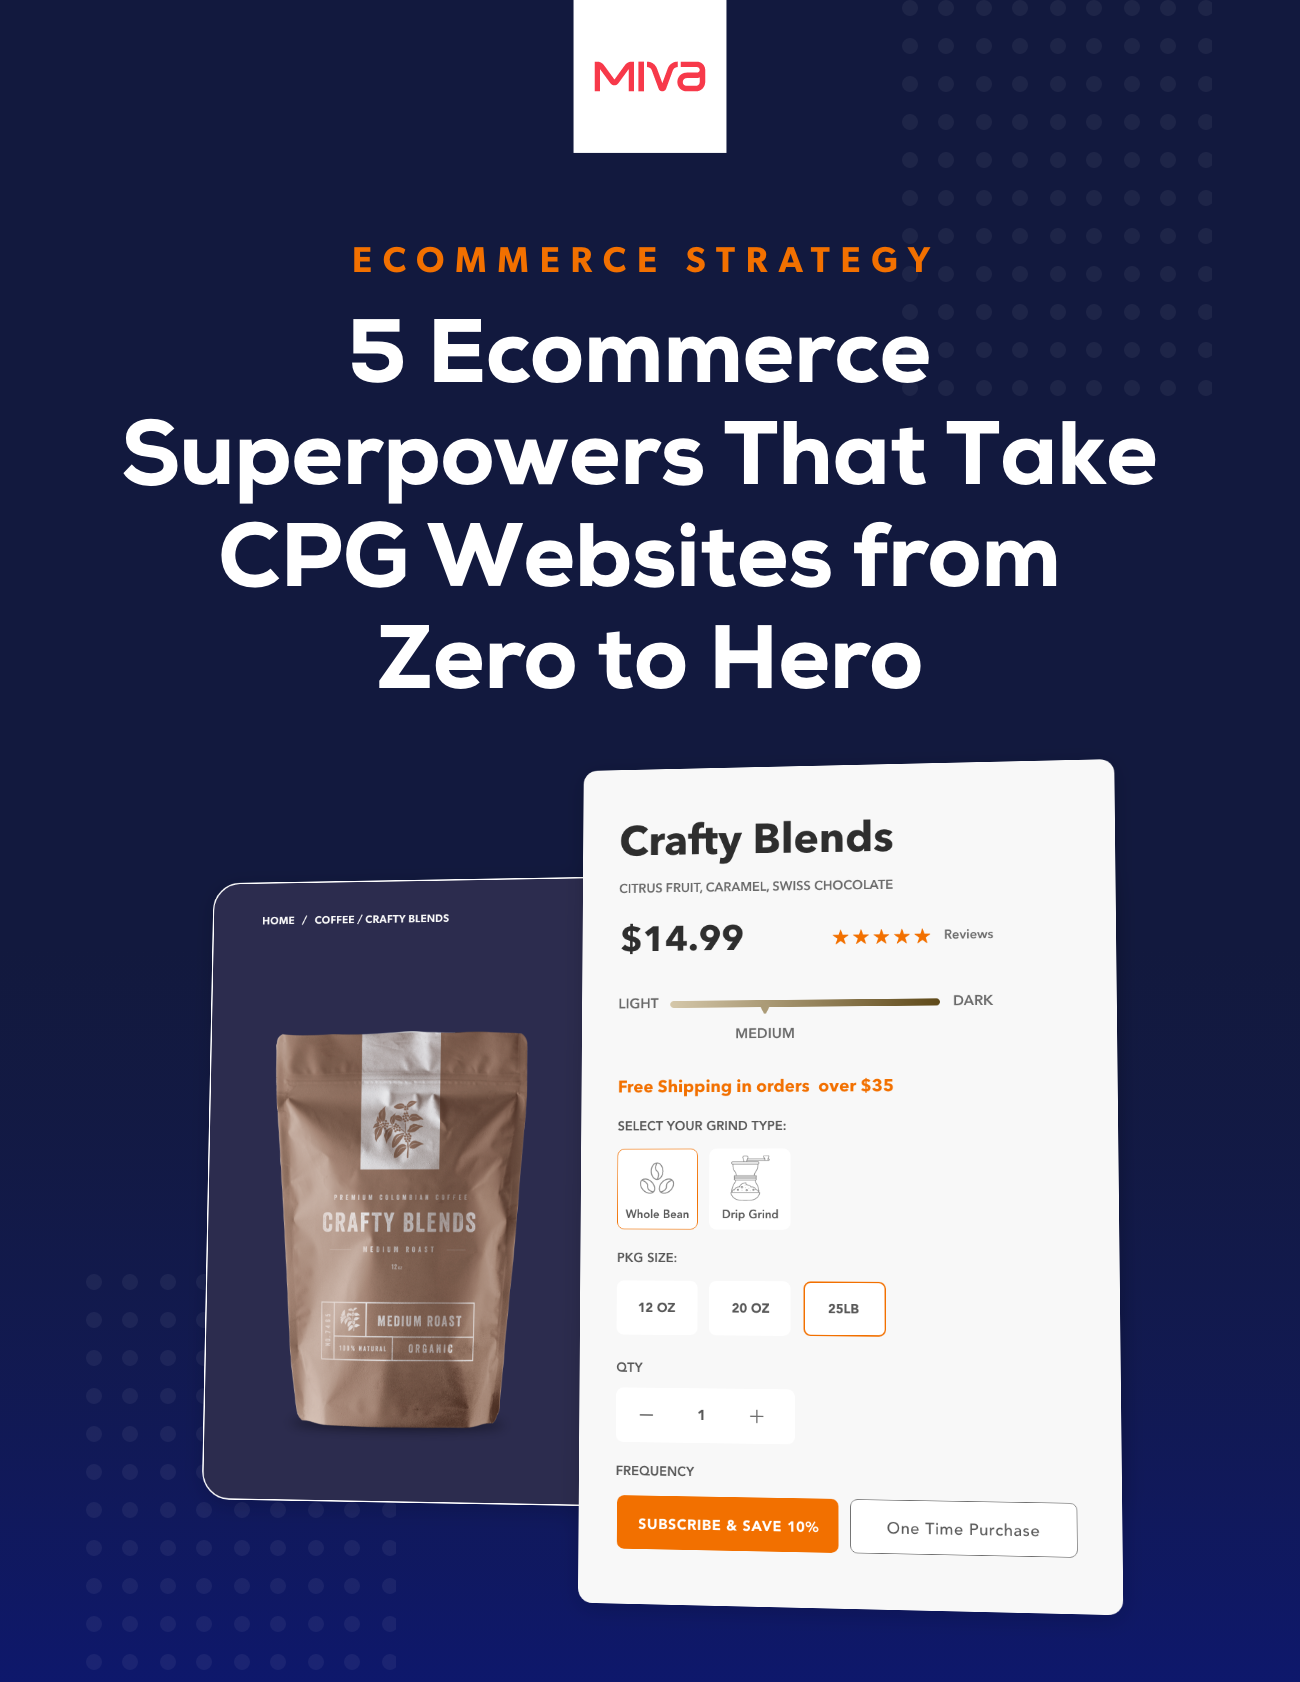 Thumbnail of infographic, 5 Ecommerce Superpowers That Take CPG Websites from Zero to Hero